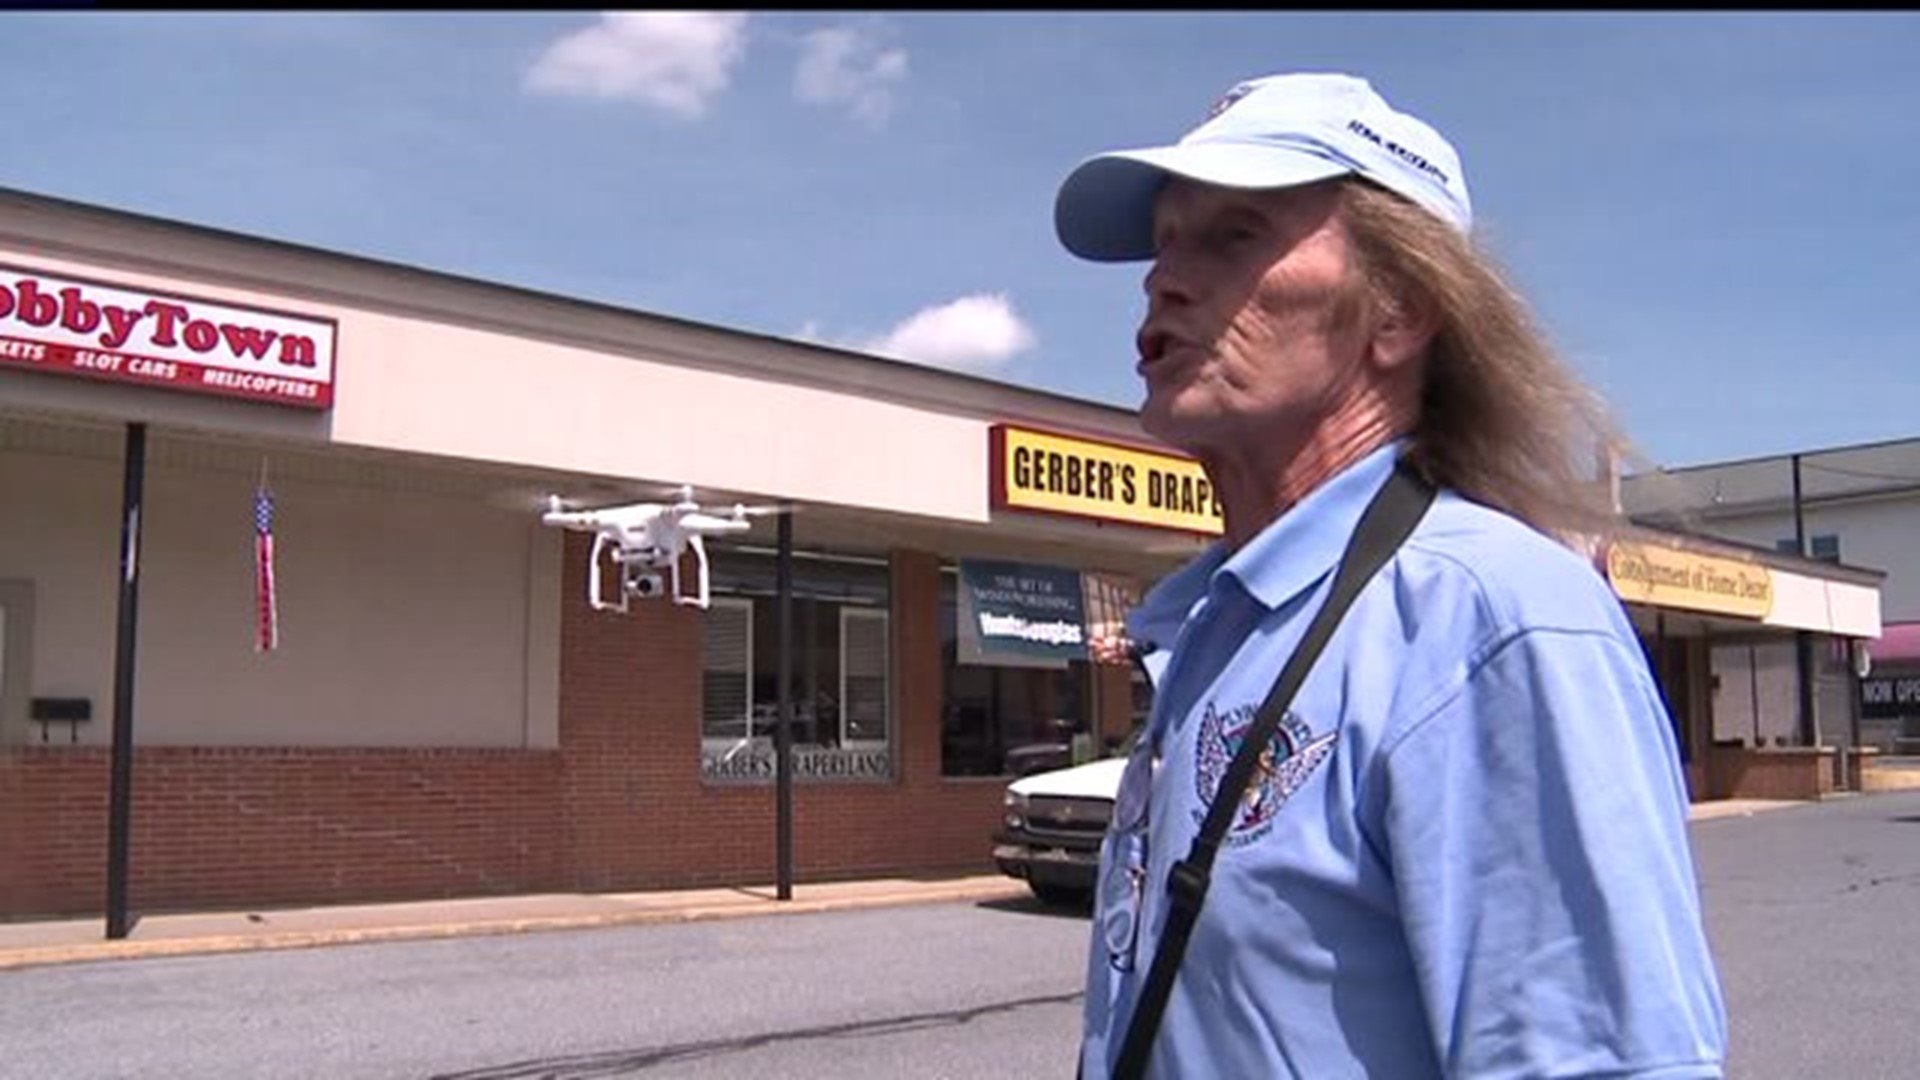 New drone laws mean big business, local professor says